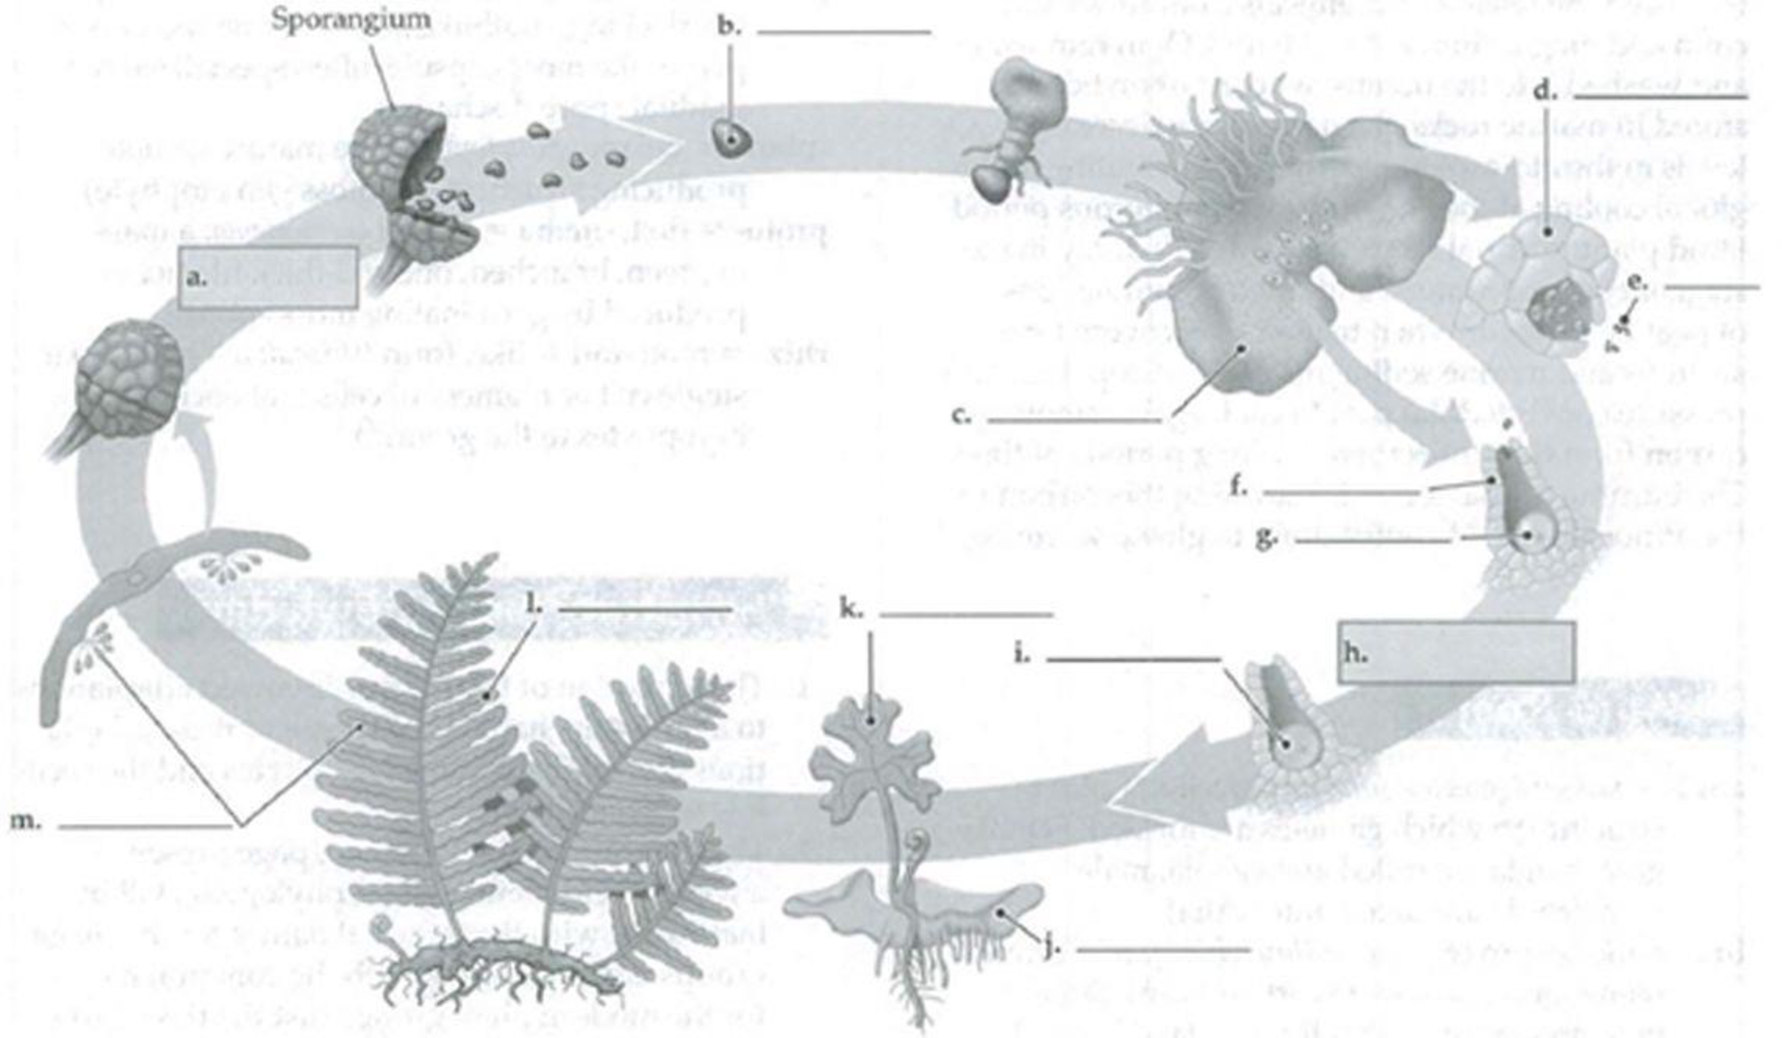 Chapter 29, Problem 6IQ, In the following diagram of the life cycle of a fern, label the processes (in the boxes) and 